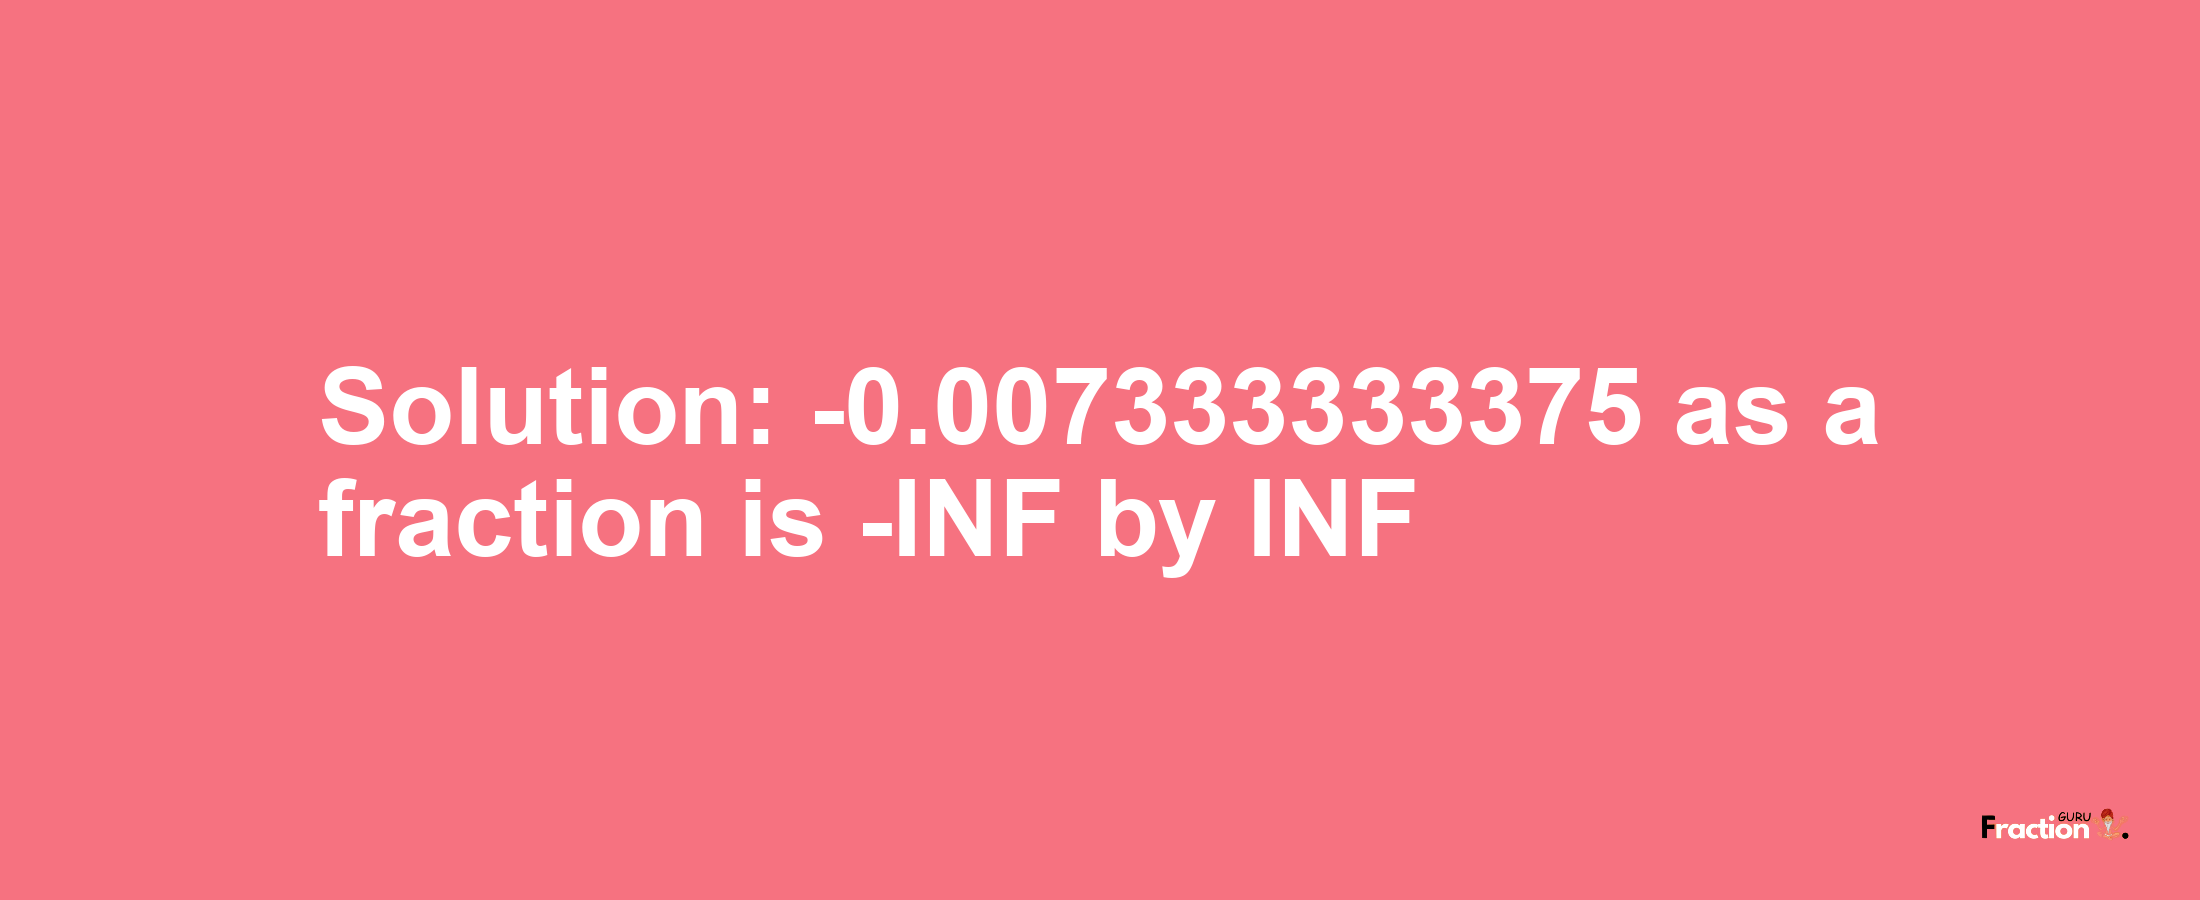 Solution:-0.007333333375 as a fraction is -INF/INF